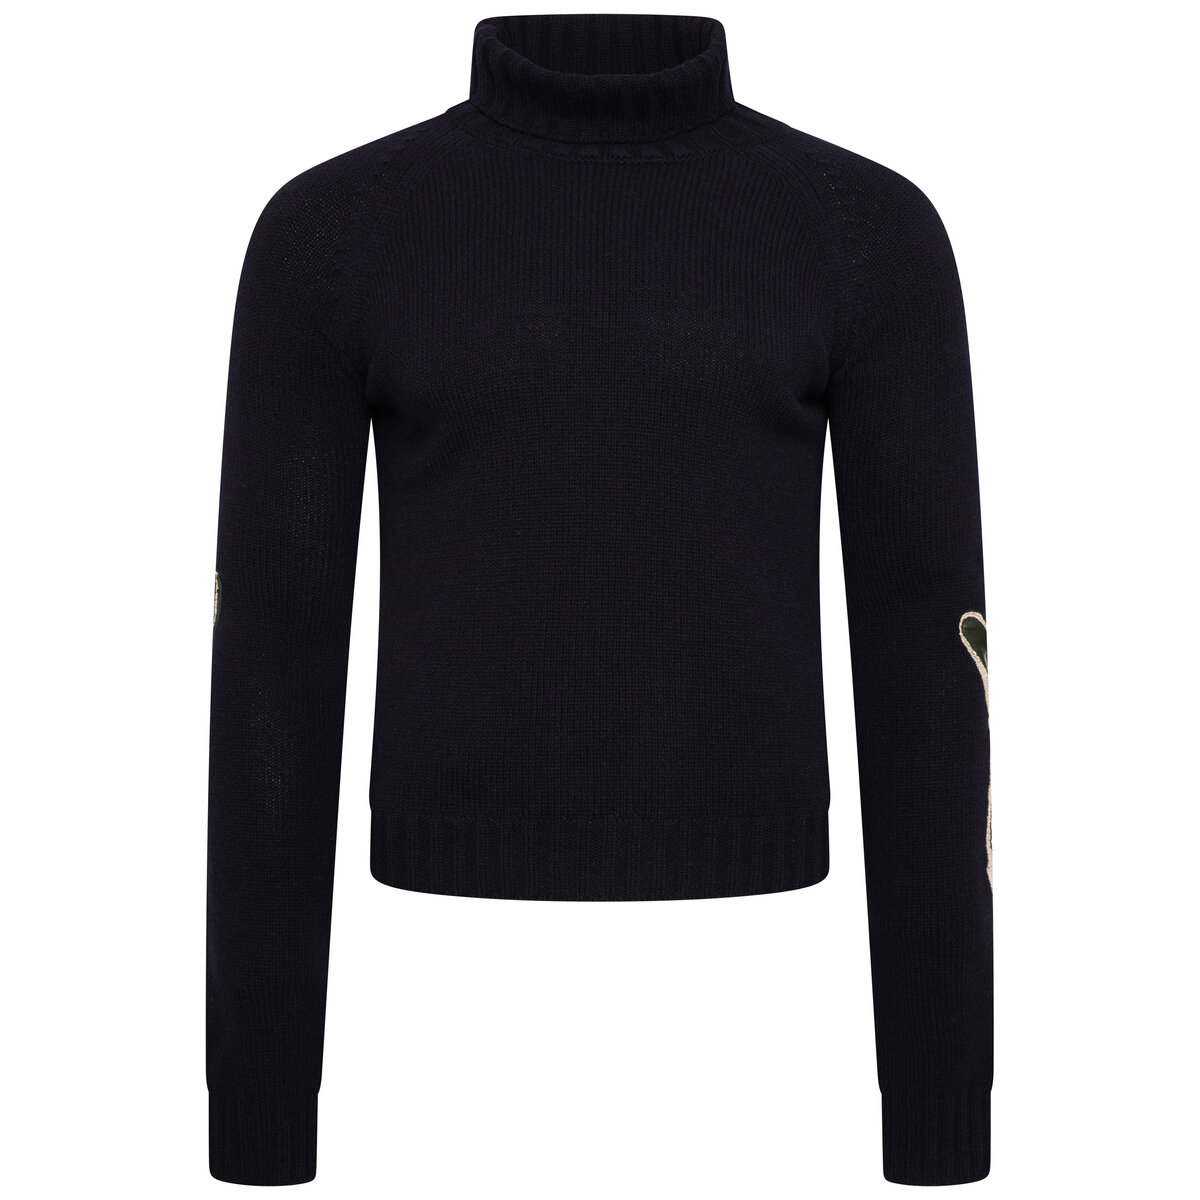 Small Fit Turtleneck Sweater With Glove S Dark Navy